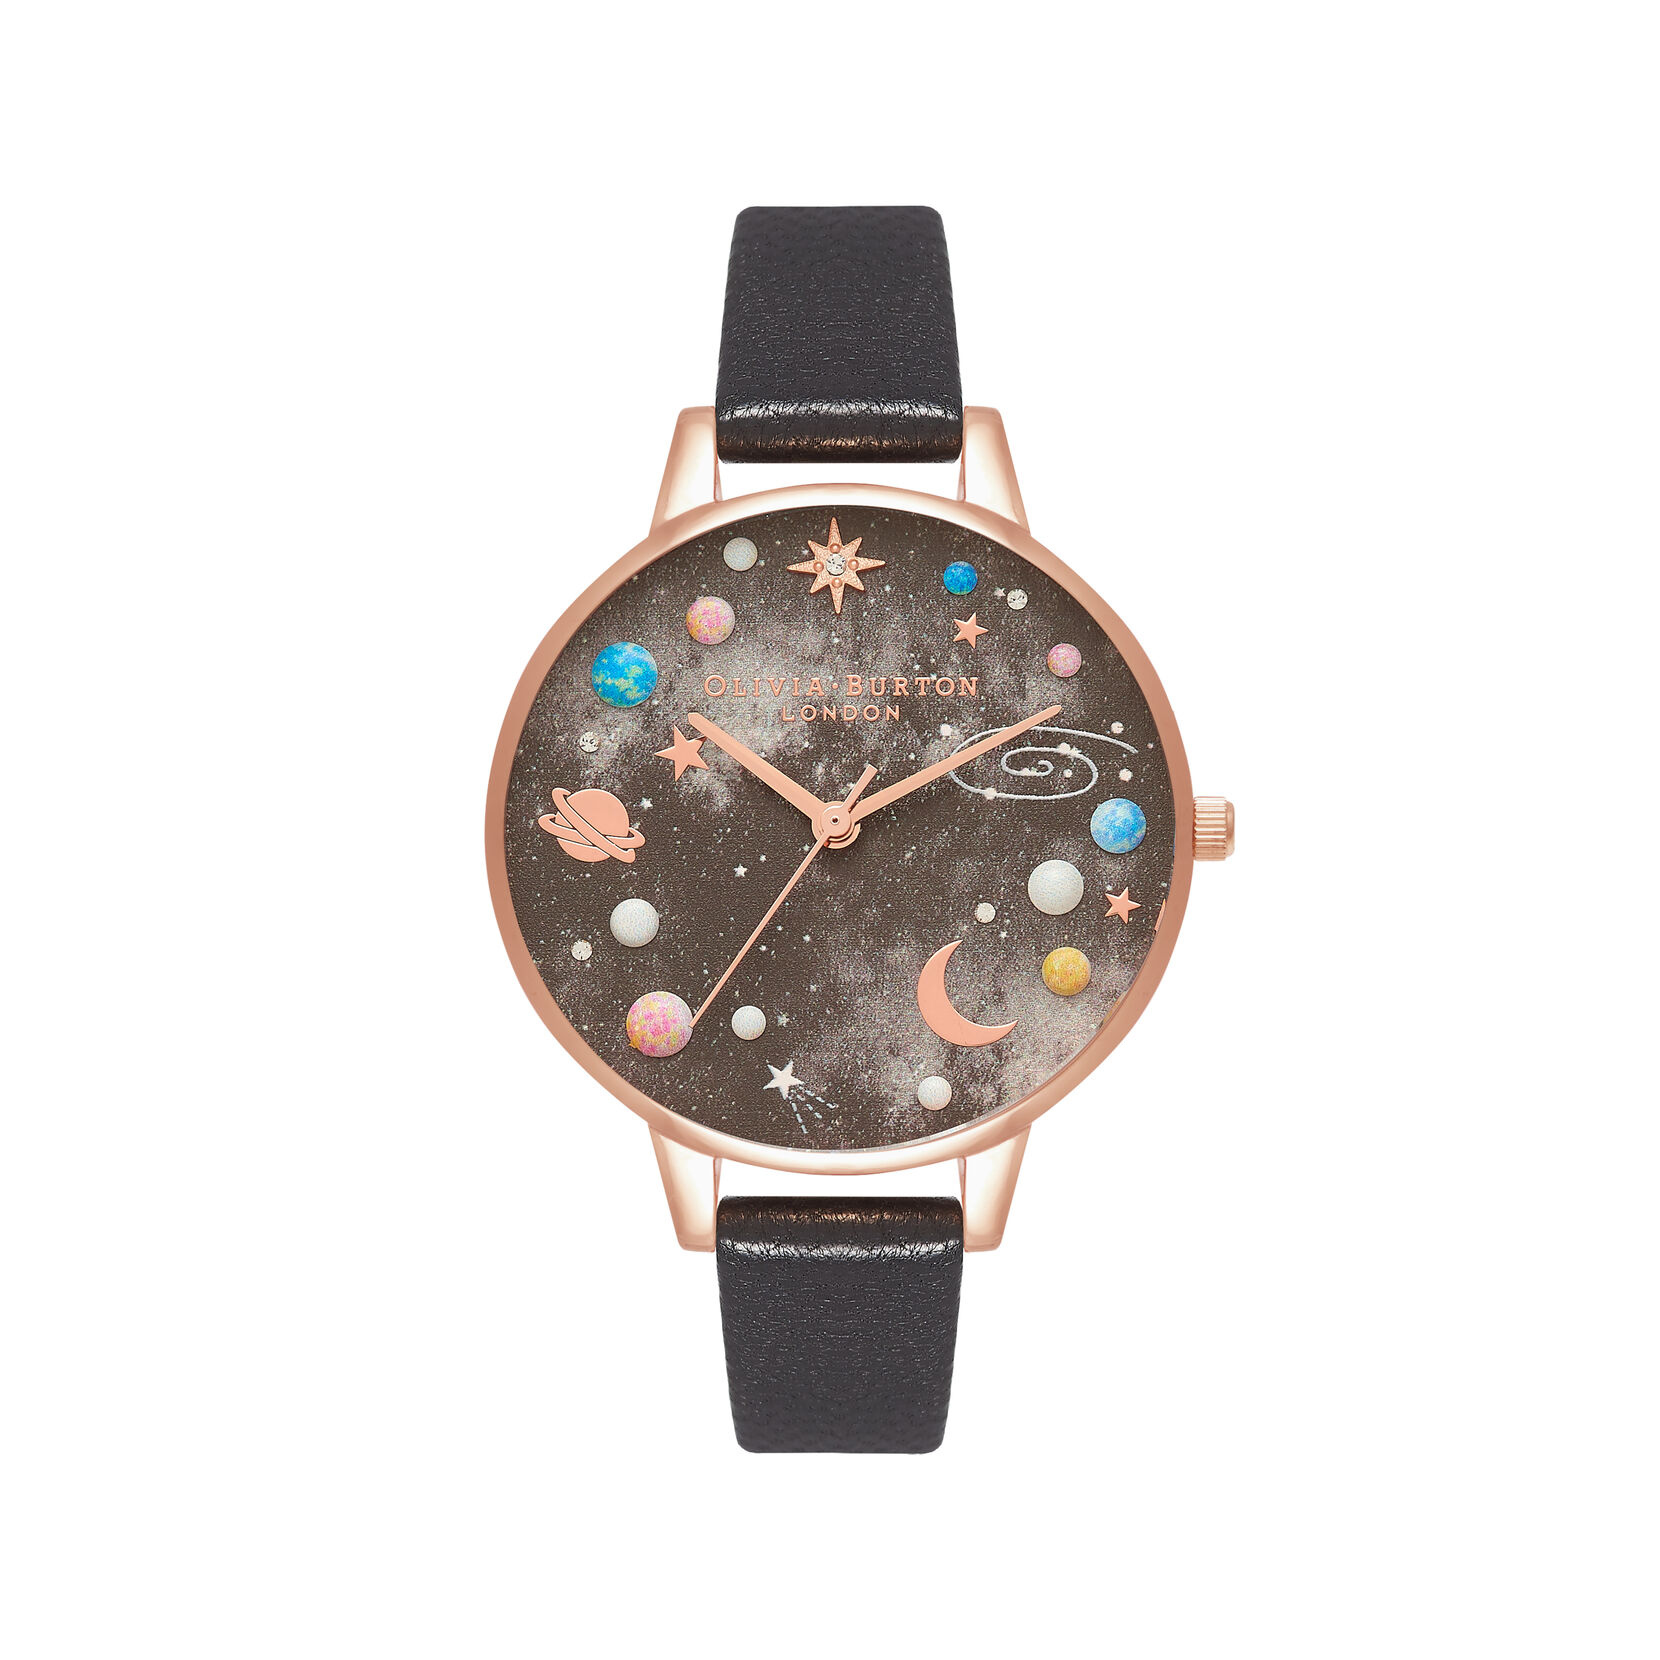 34mm Rose Gold & Black Leather Strap Watch